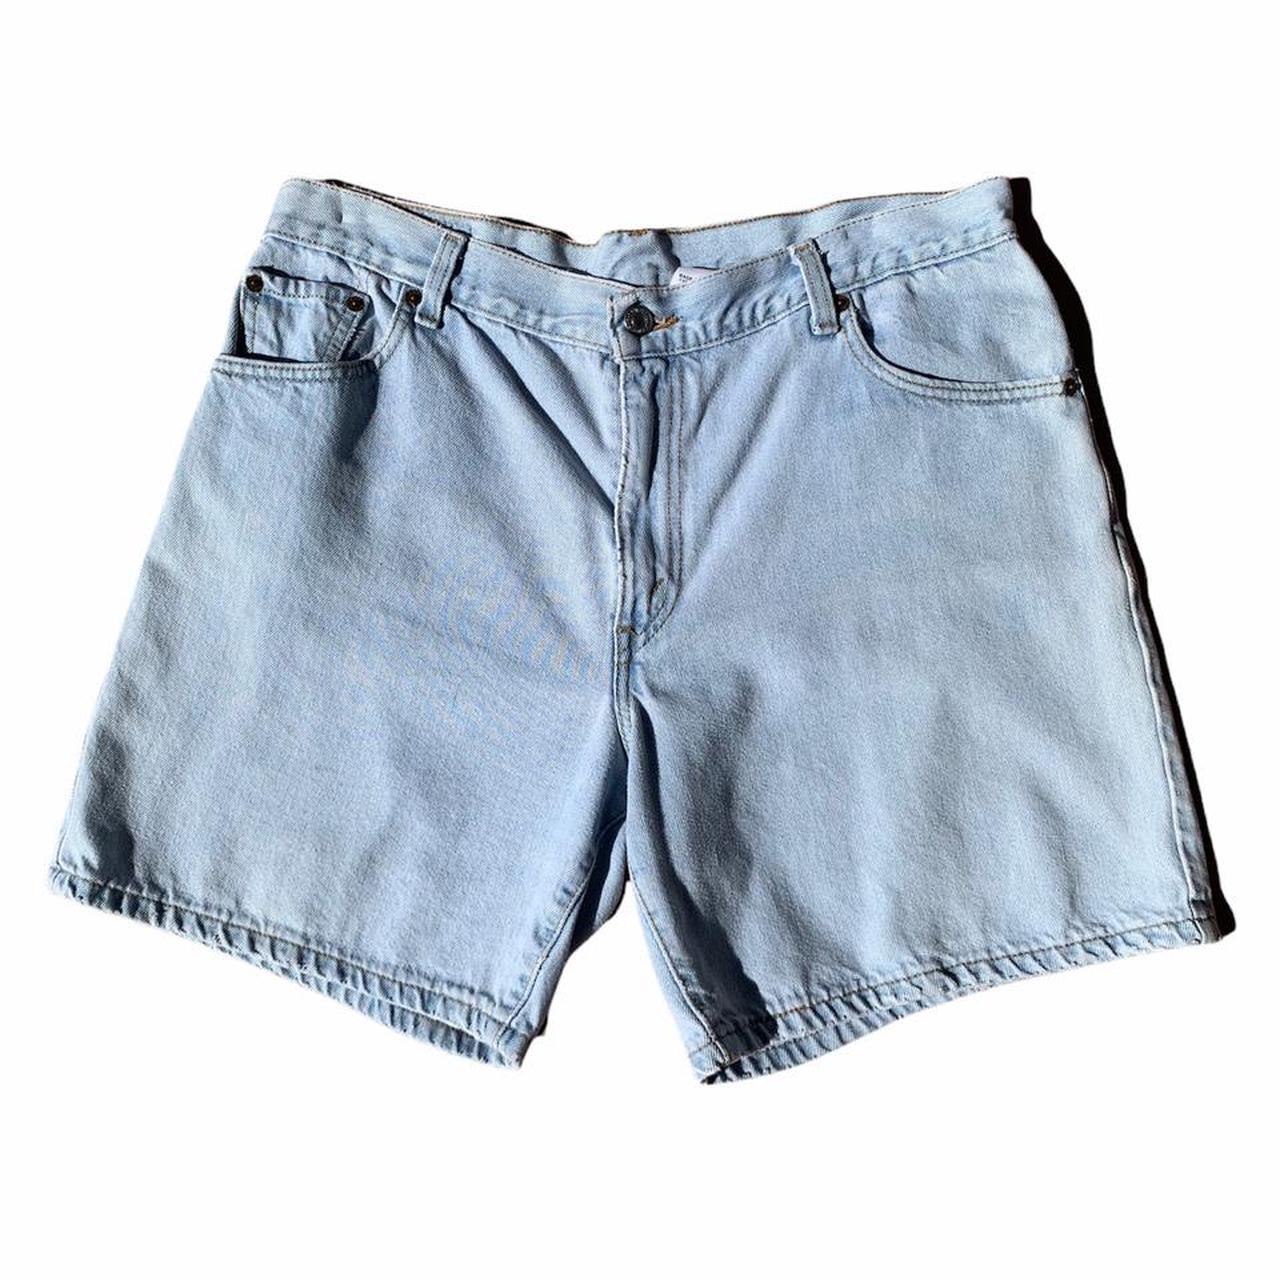 These soft and worn Levi’s denim shorts are a... - Depop